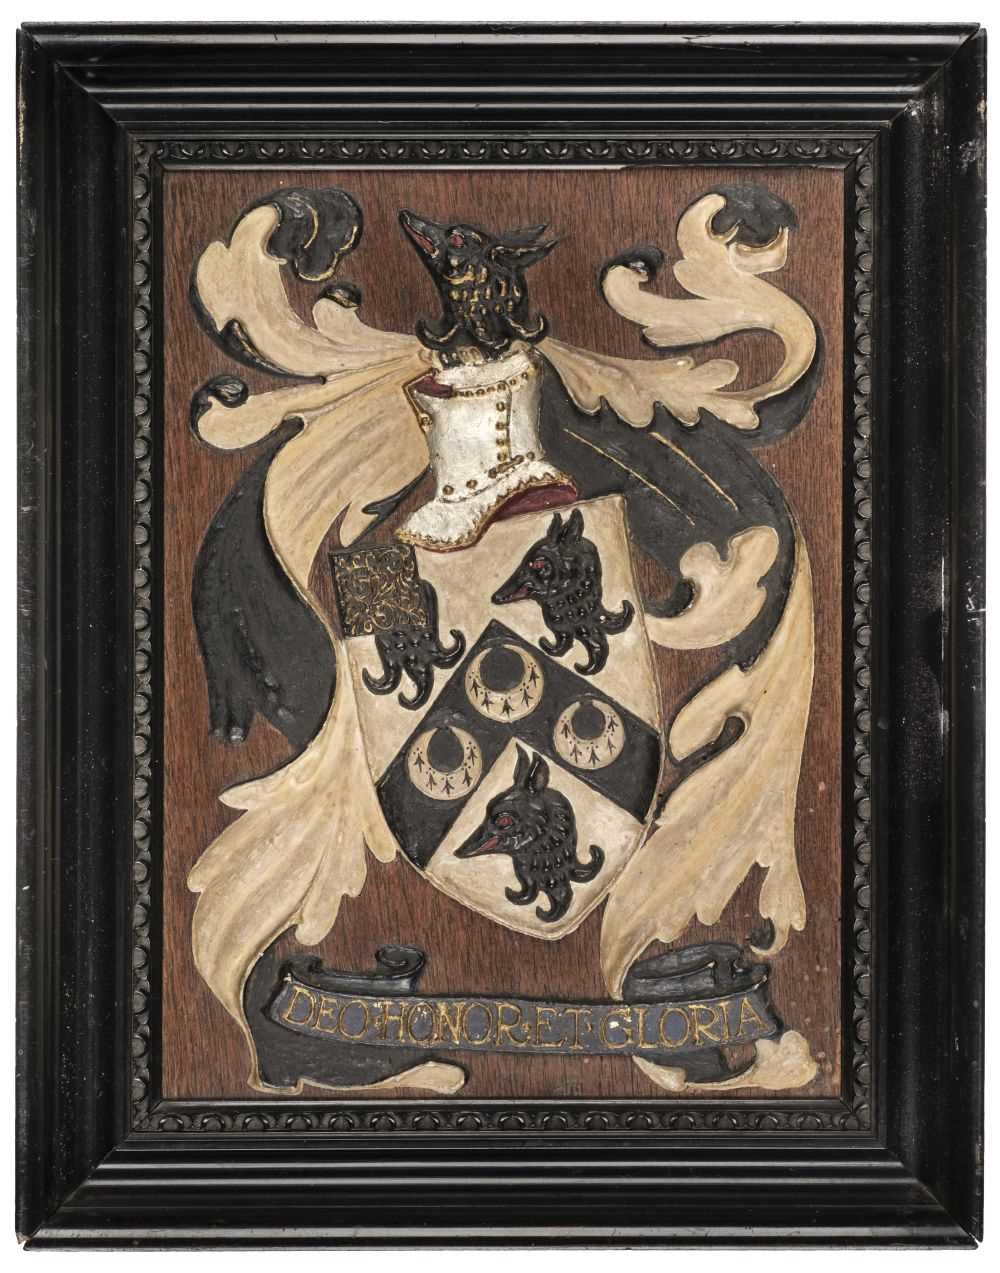 Lot 305 - Heraldry. An armorial panel of Major F.P.R. Nichols M.C.  R.A.S.C., early 20th century